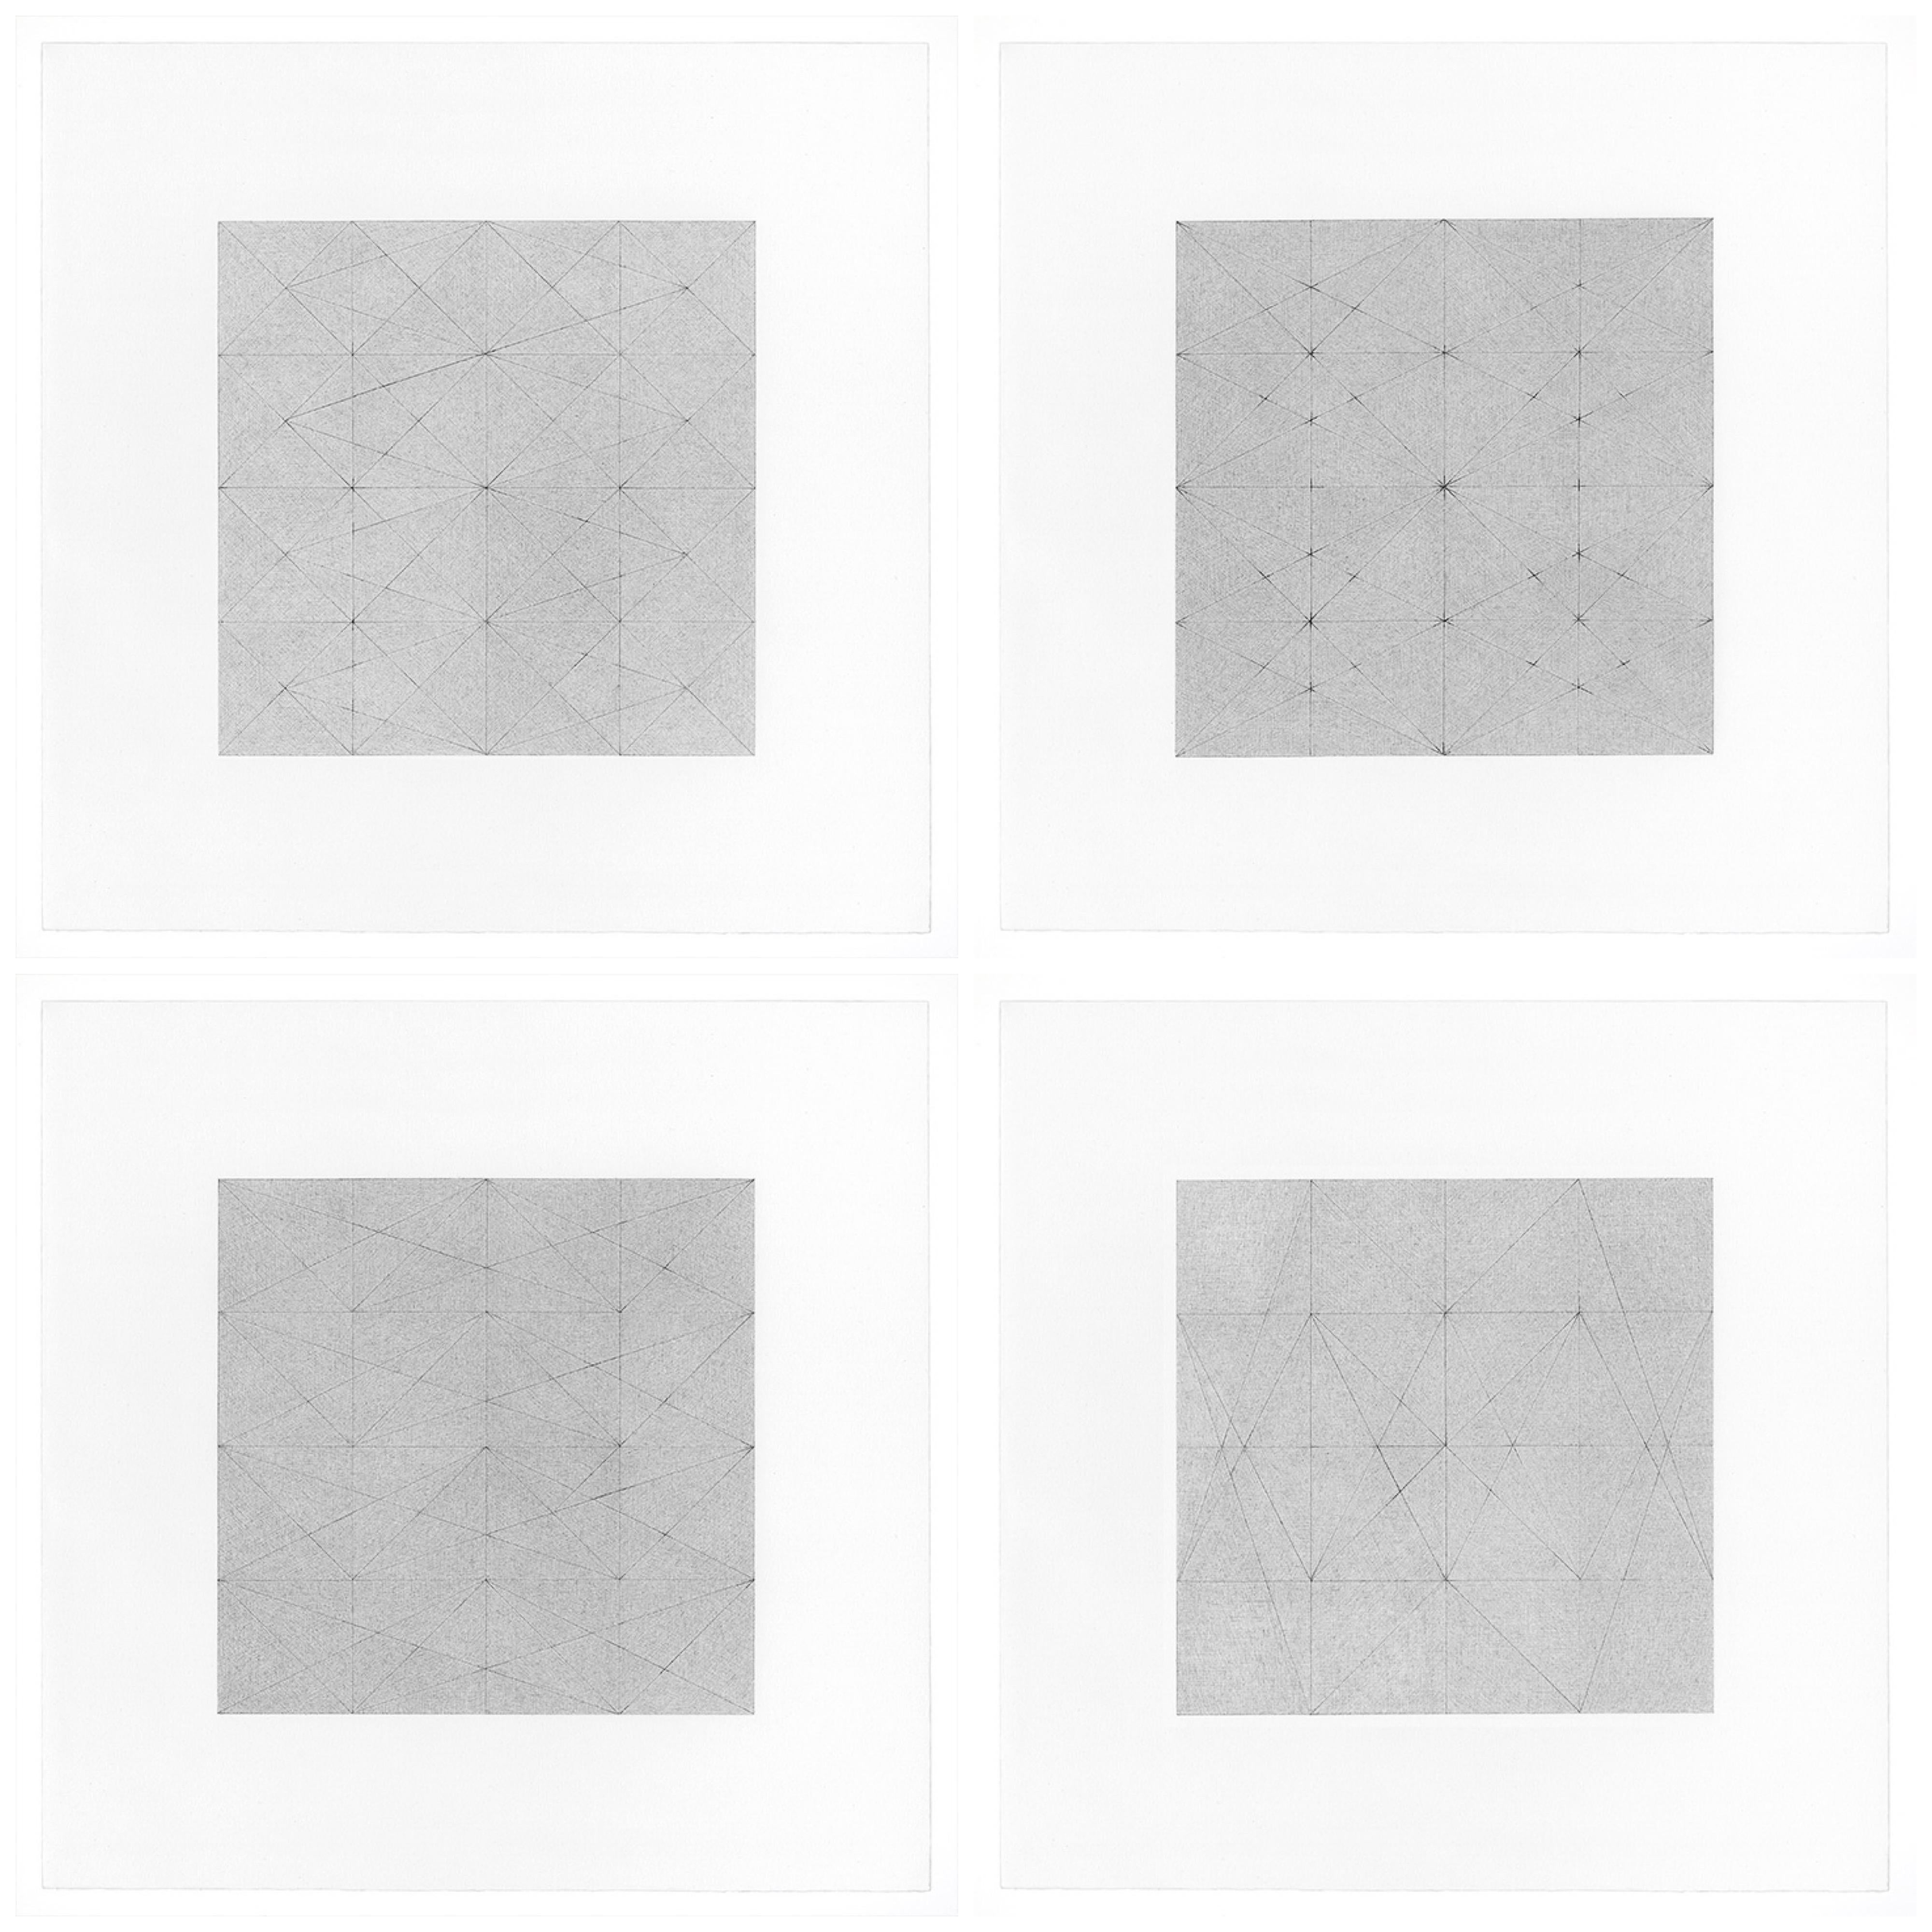 Paper Patrick Carrara Graphite on Magni Drawings, Garden of Silence Series, 2009 For Sale